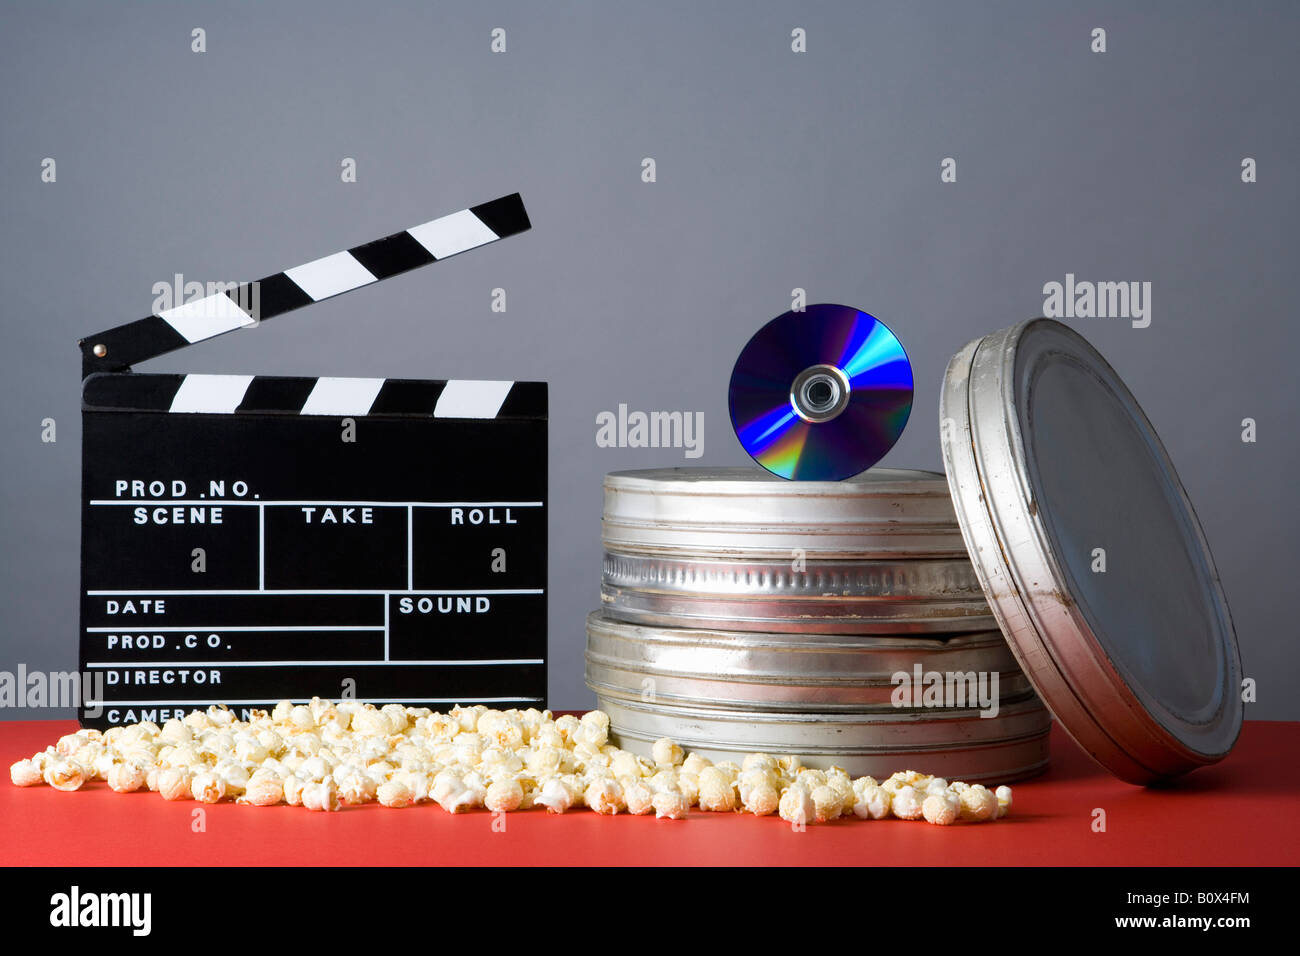 Clapperboard, popcorn, film reels and CD Stock Photo